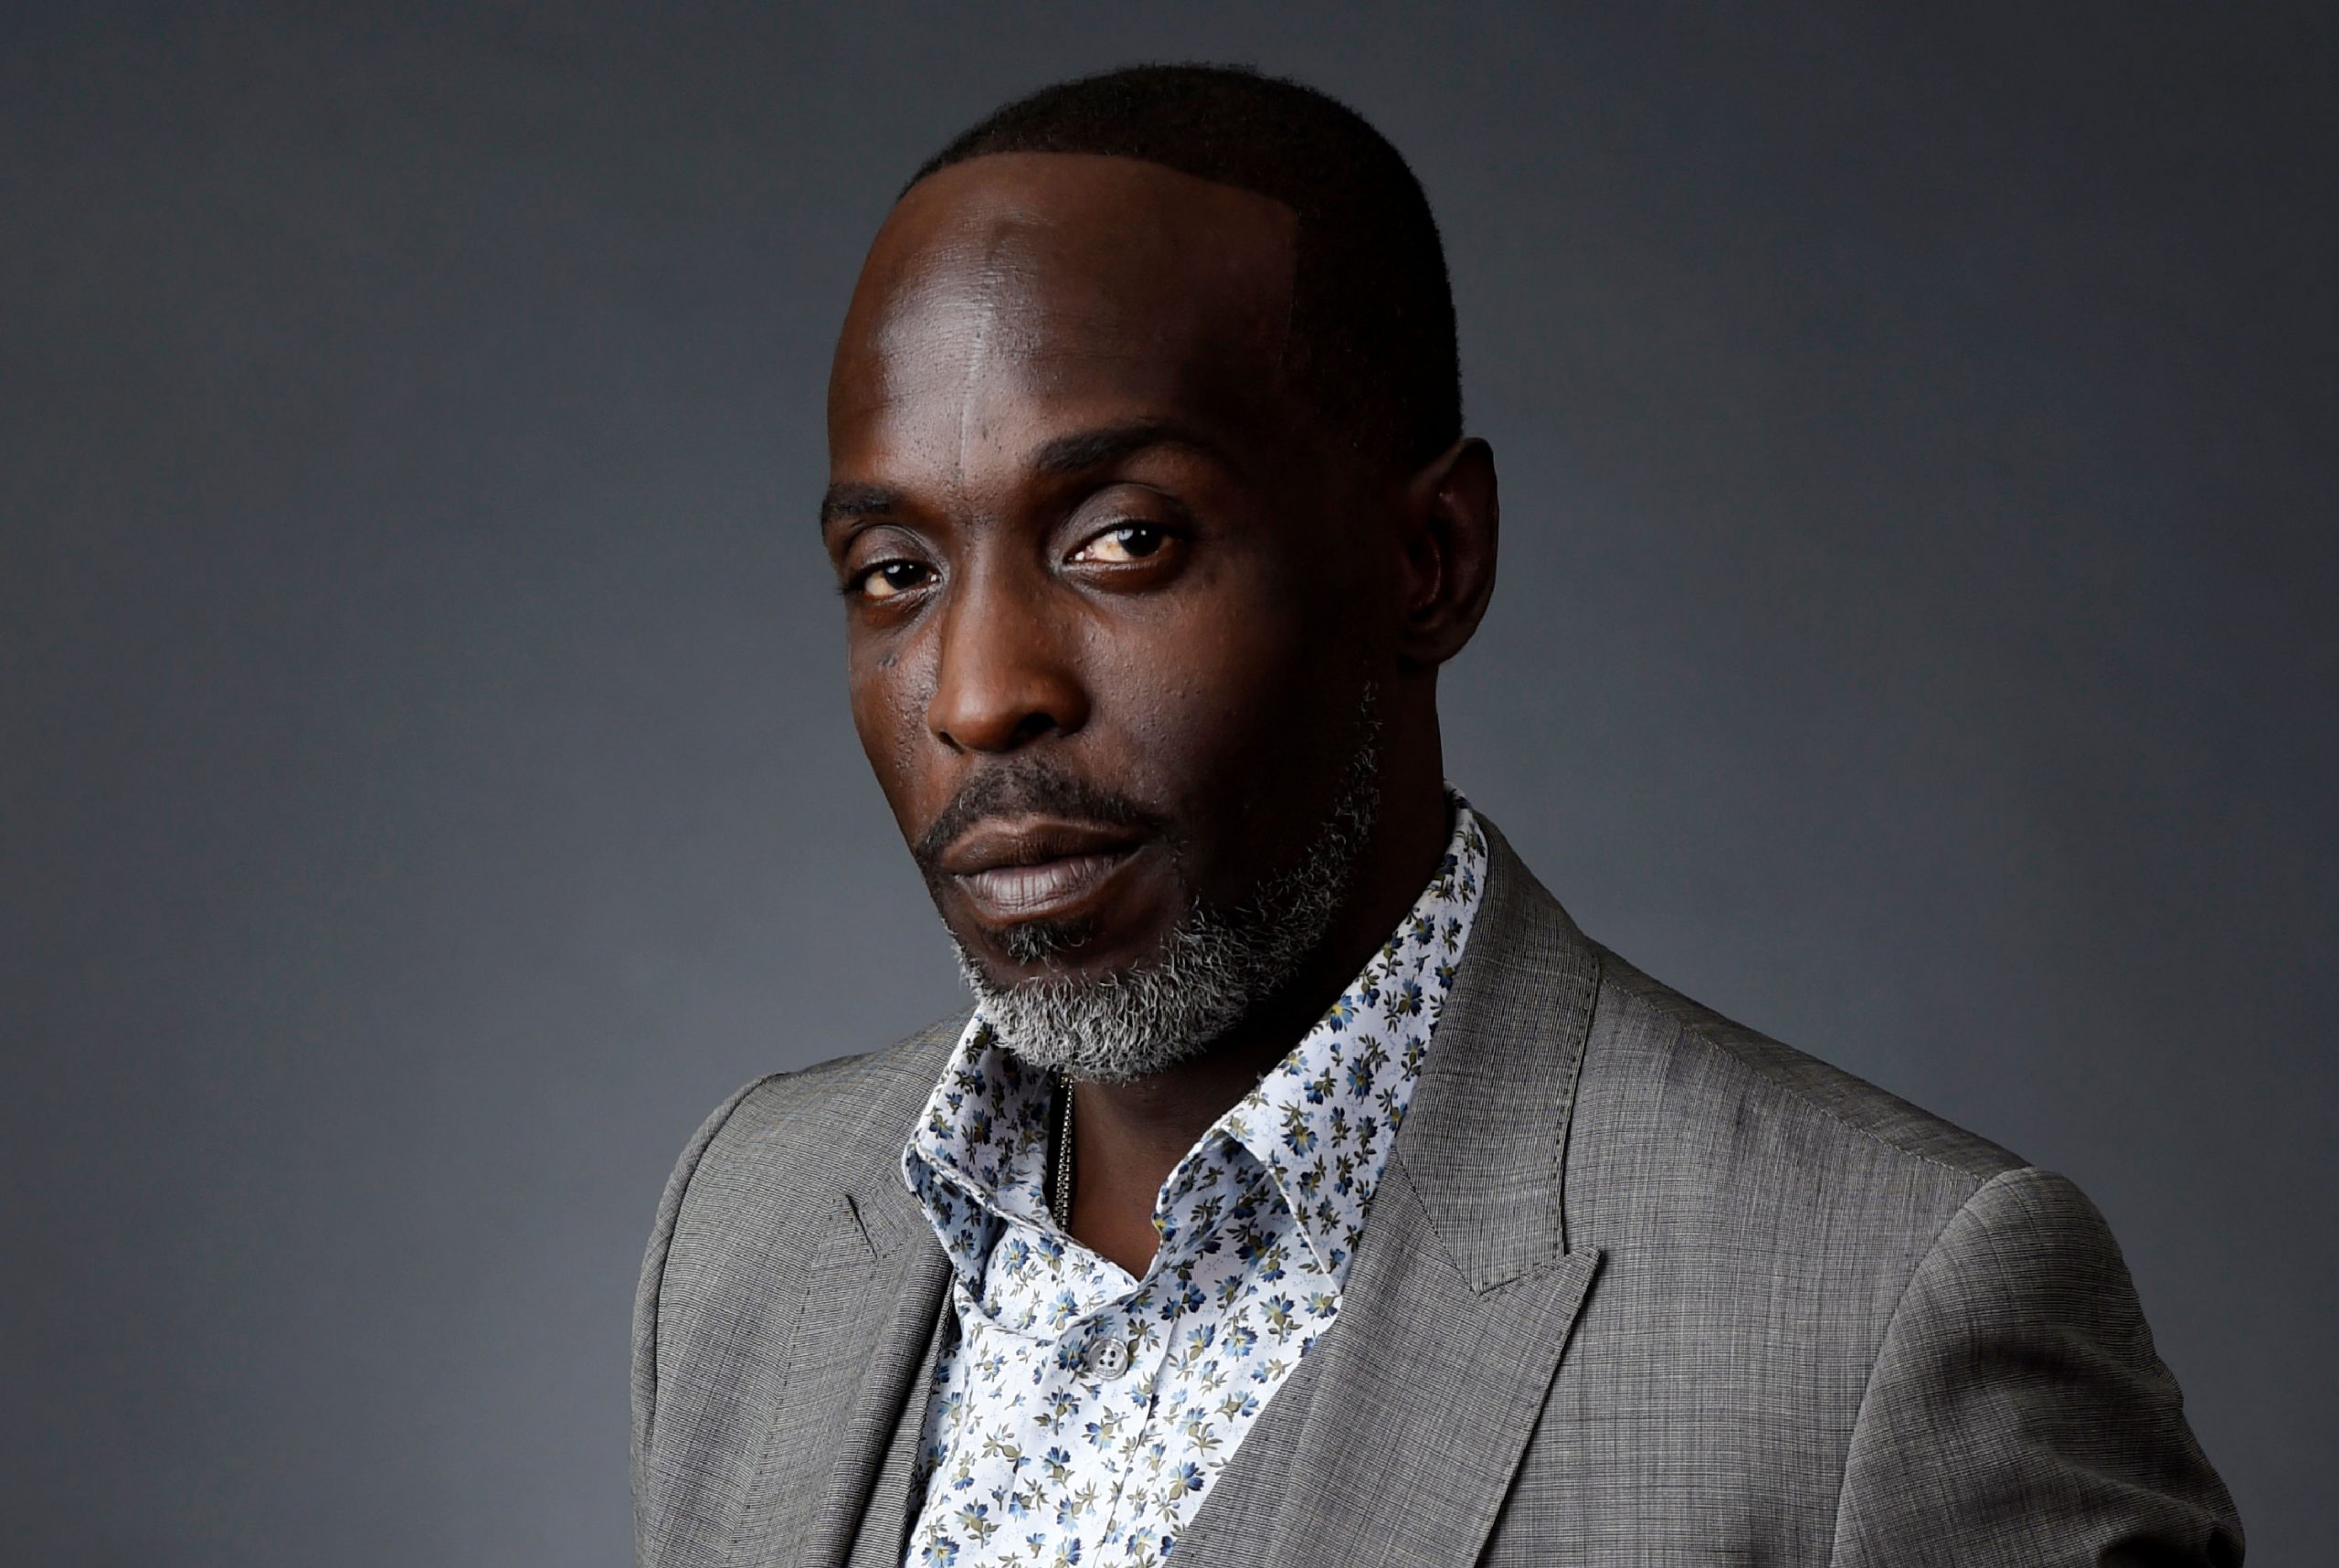 Michael K. Williams overdose death: 4 charged for supplying drugs to actor